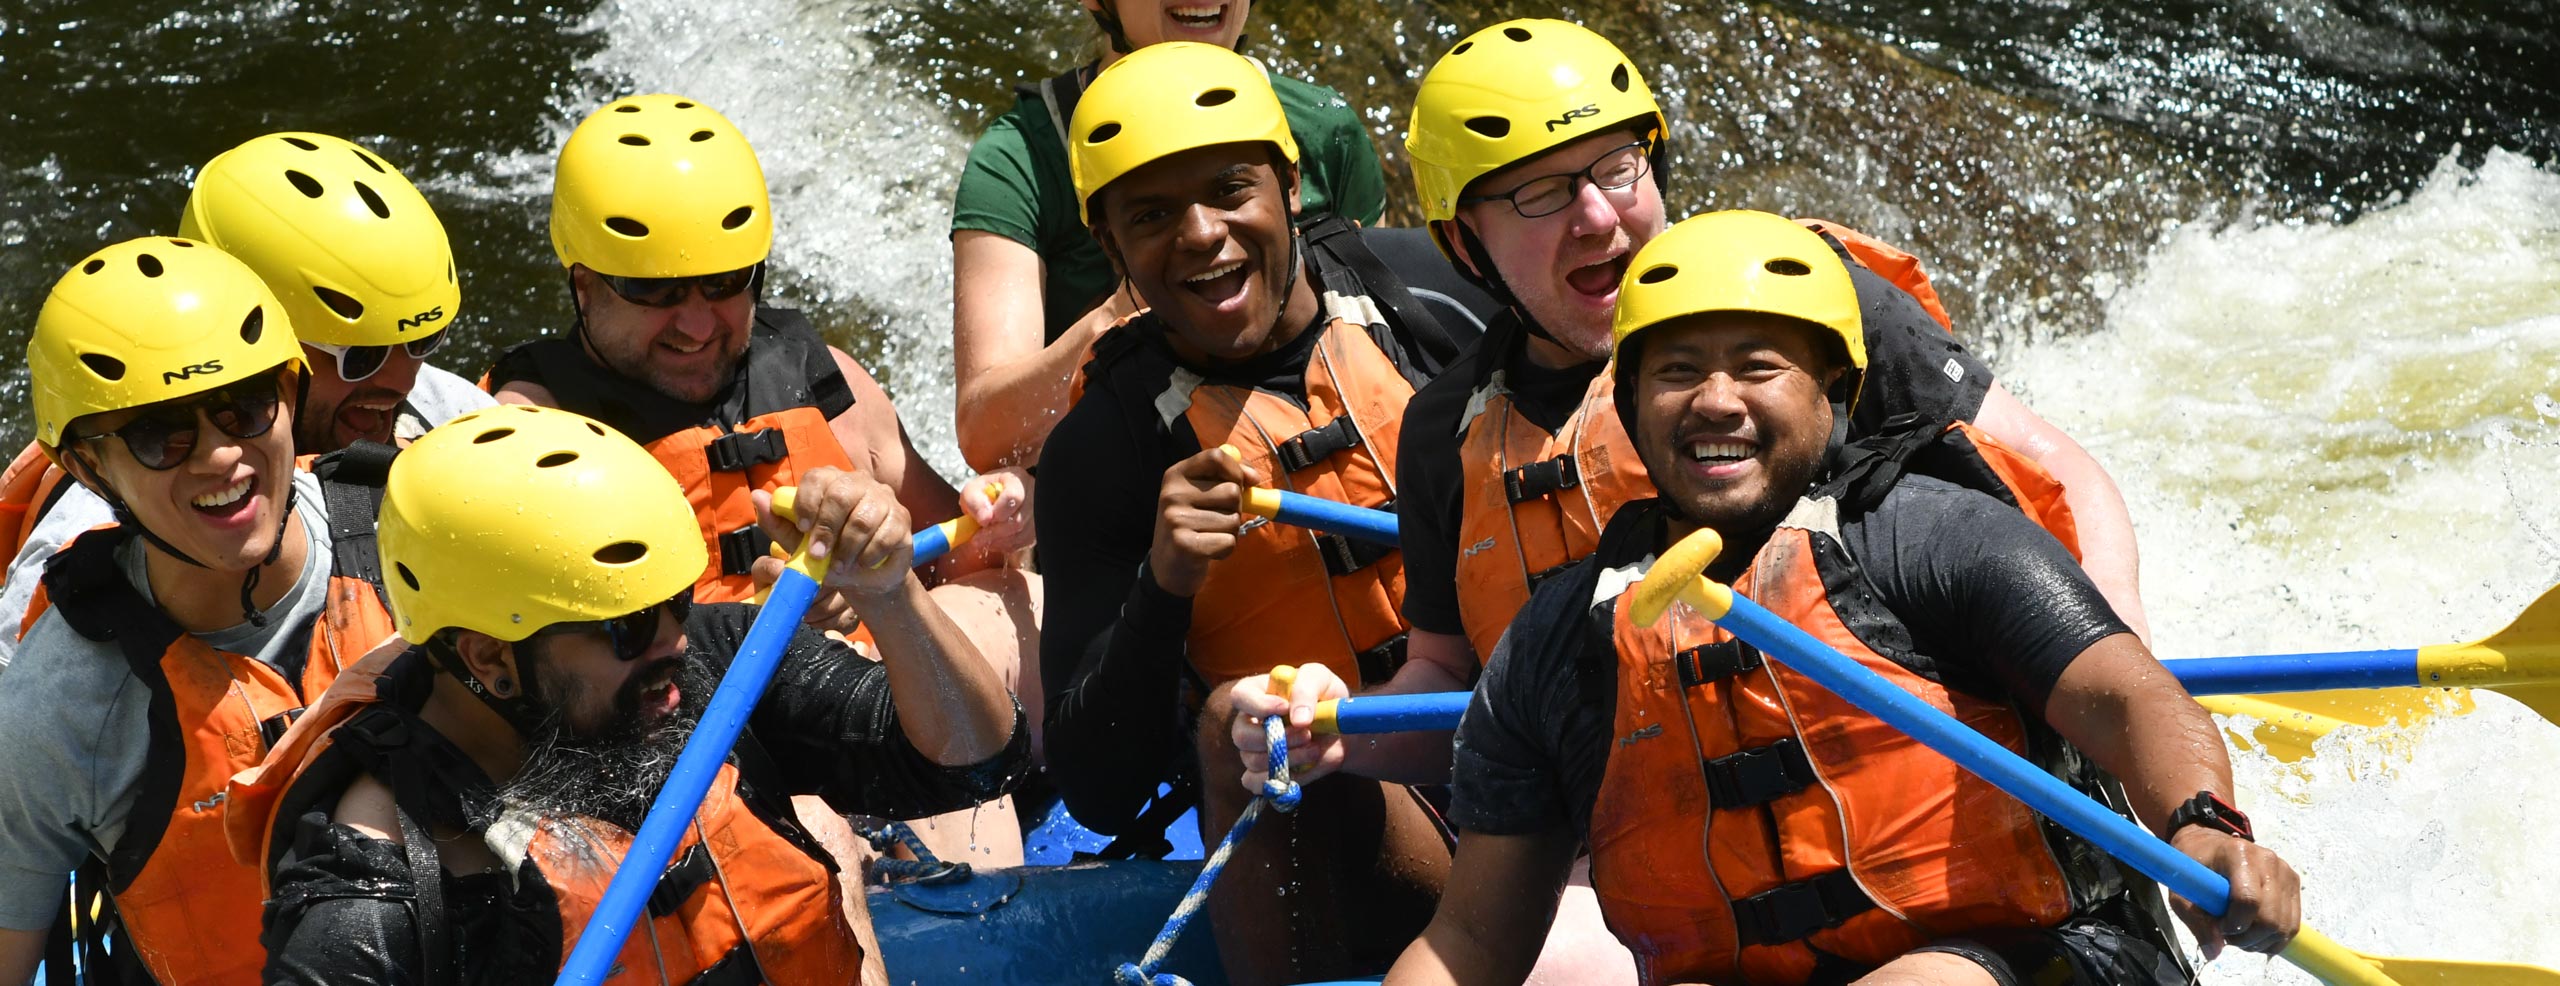 Group of people in a raft smiling and having fun paddling